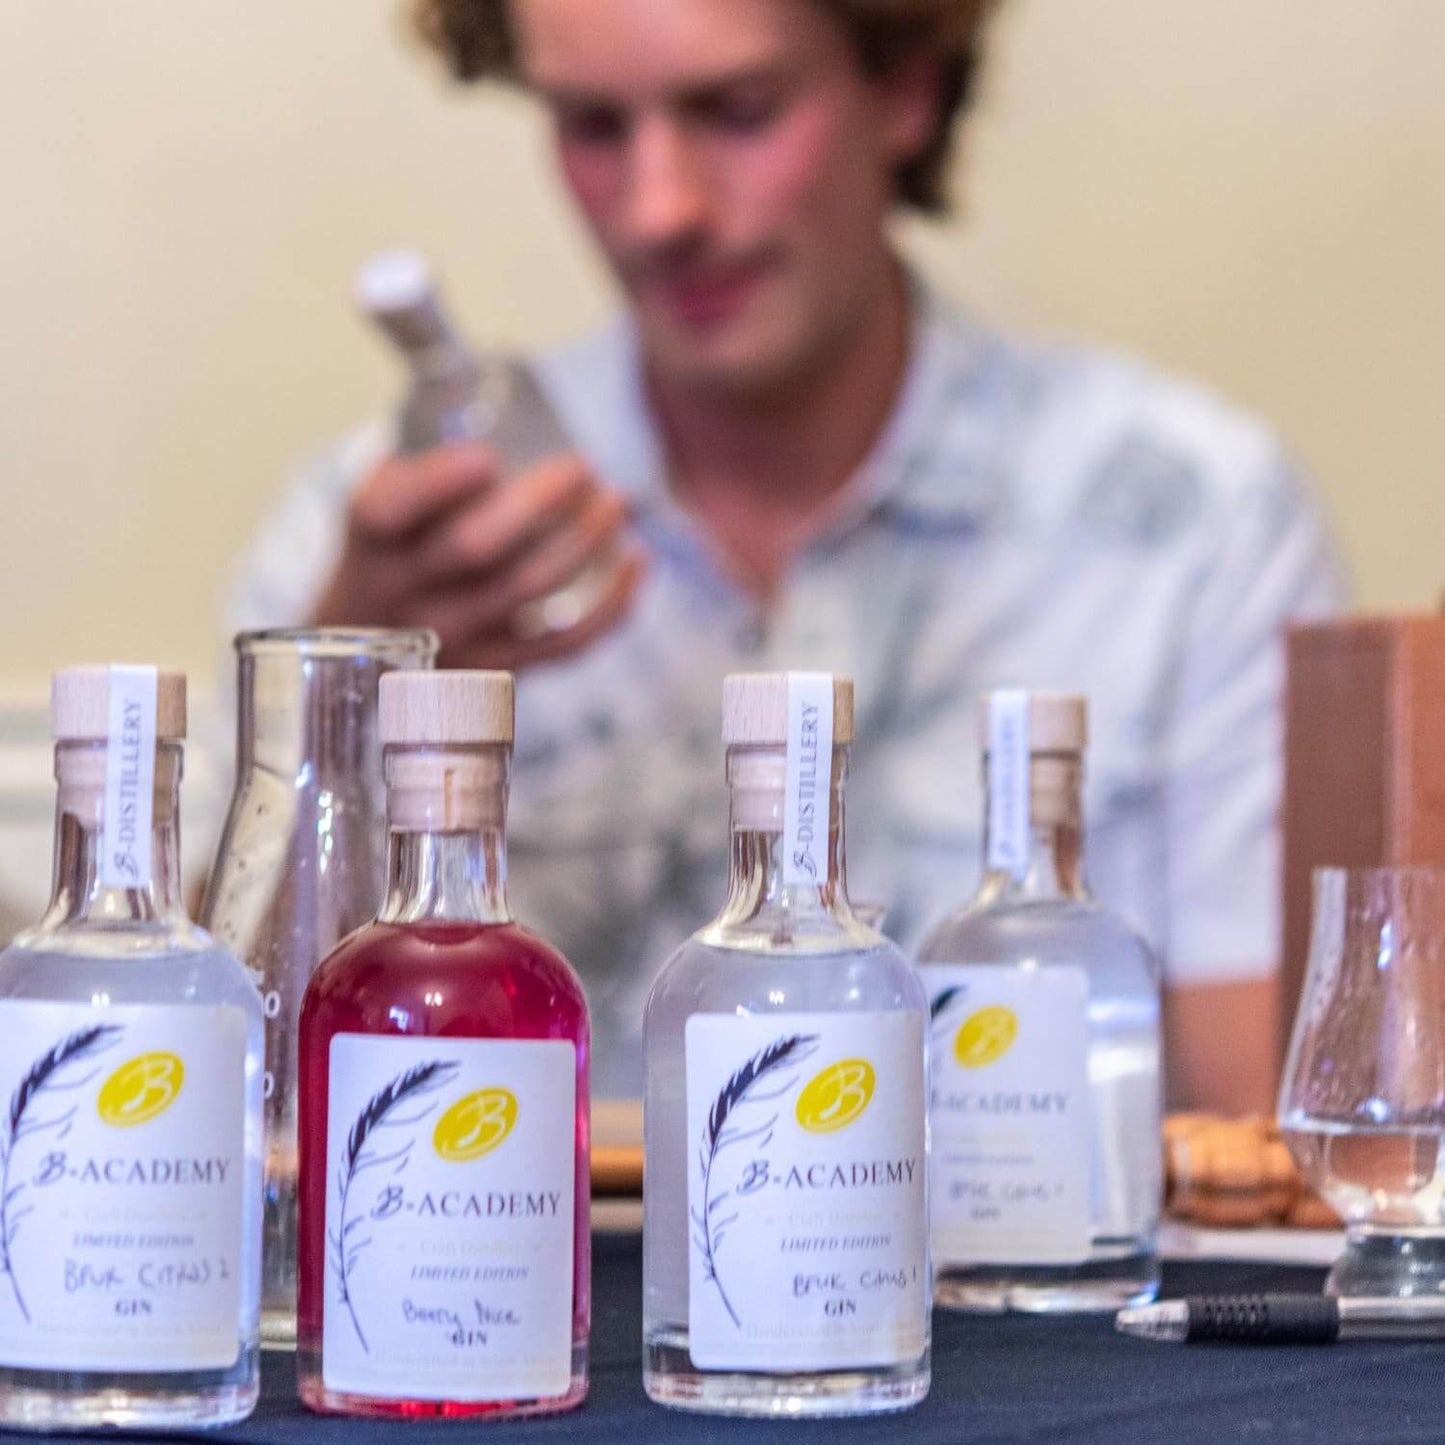 Labelling your custom gin - B - Academy